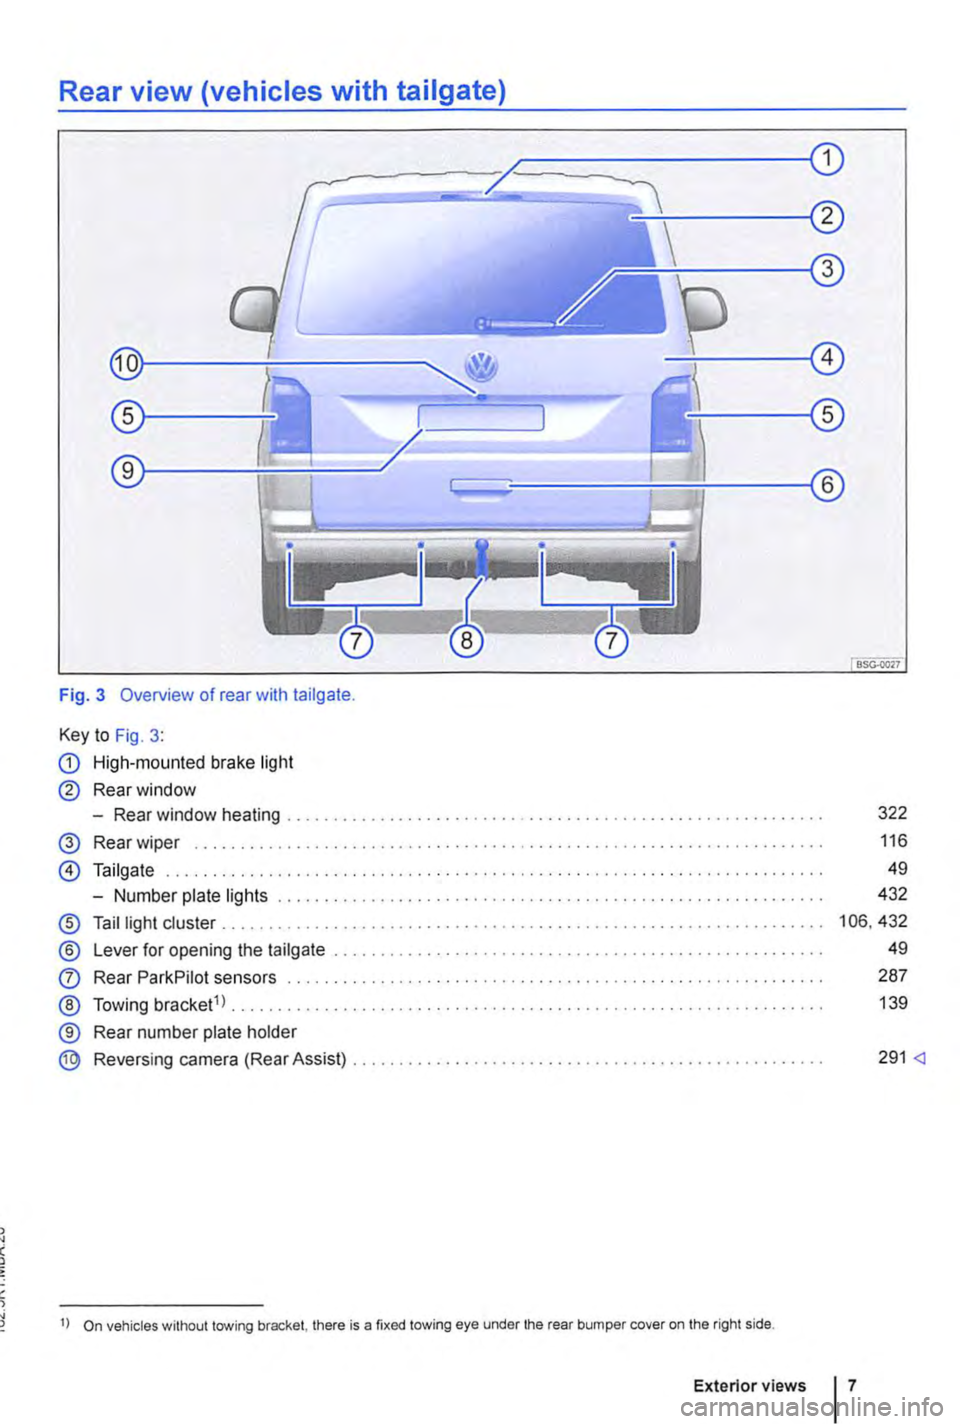 VOLKSWAGEN TRANSPORTER 2018  Owners Manual Rear view (vehicles with tailgate) 
Fig. 3 Overview of rear with tailgate. 
Key to Fig. 3: 
CD High-mounted brake light 
@ Rear window 
-Rear window heating ........................ . 
@ Rear wiper ..